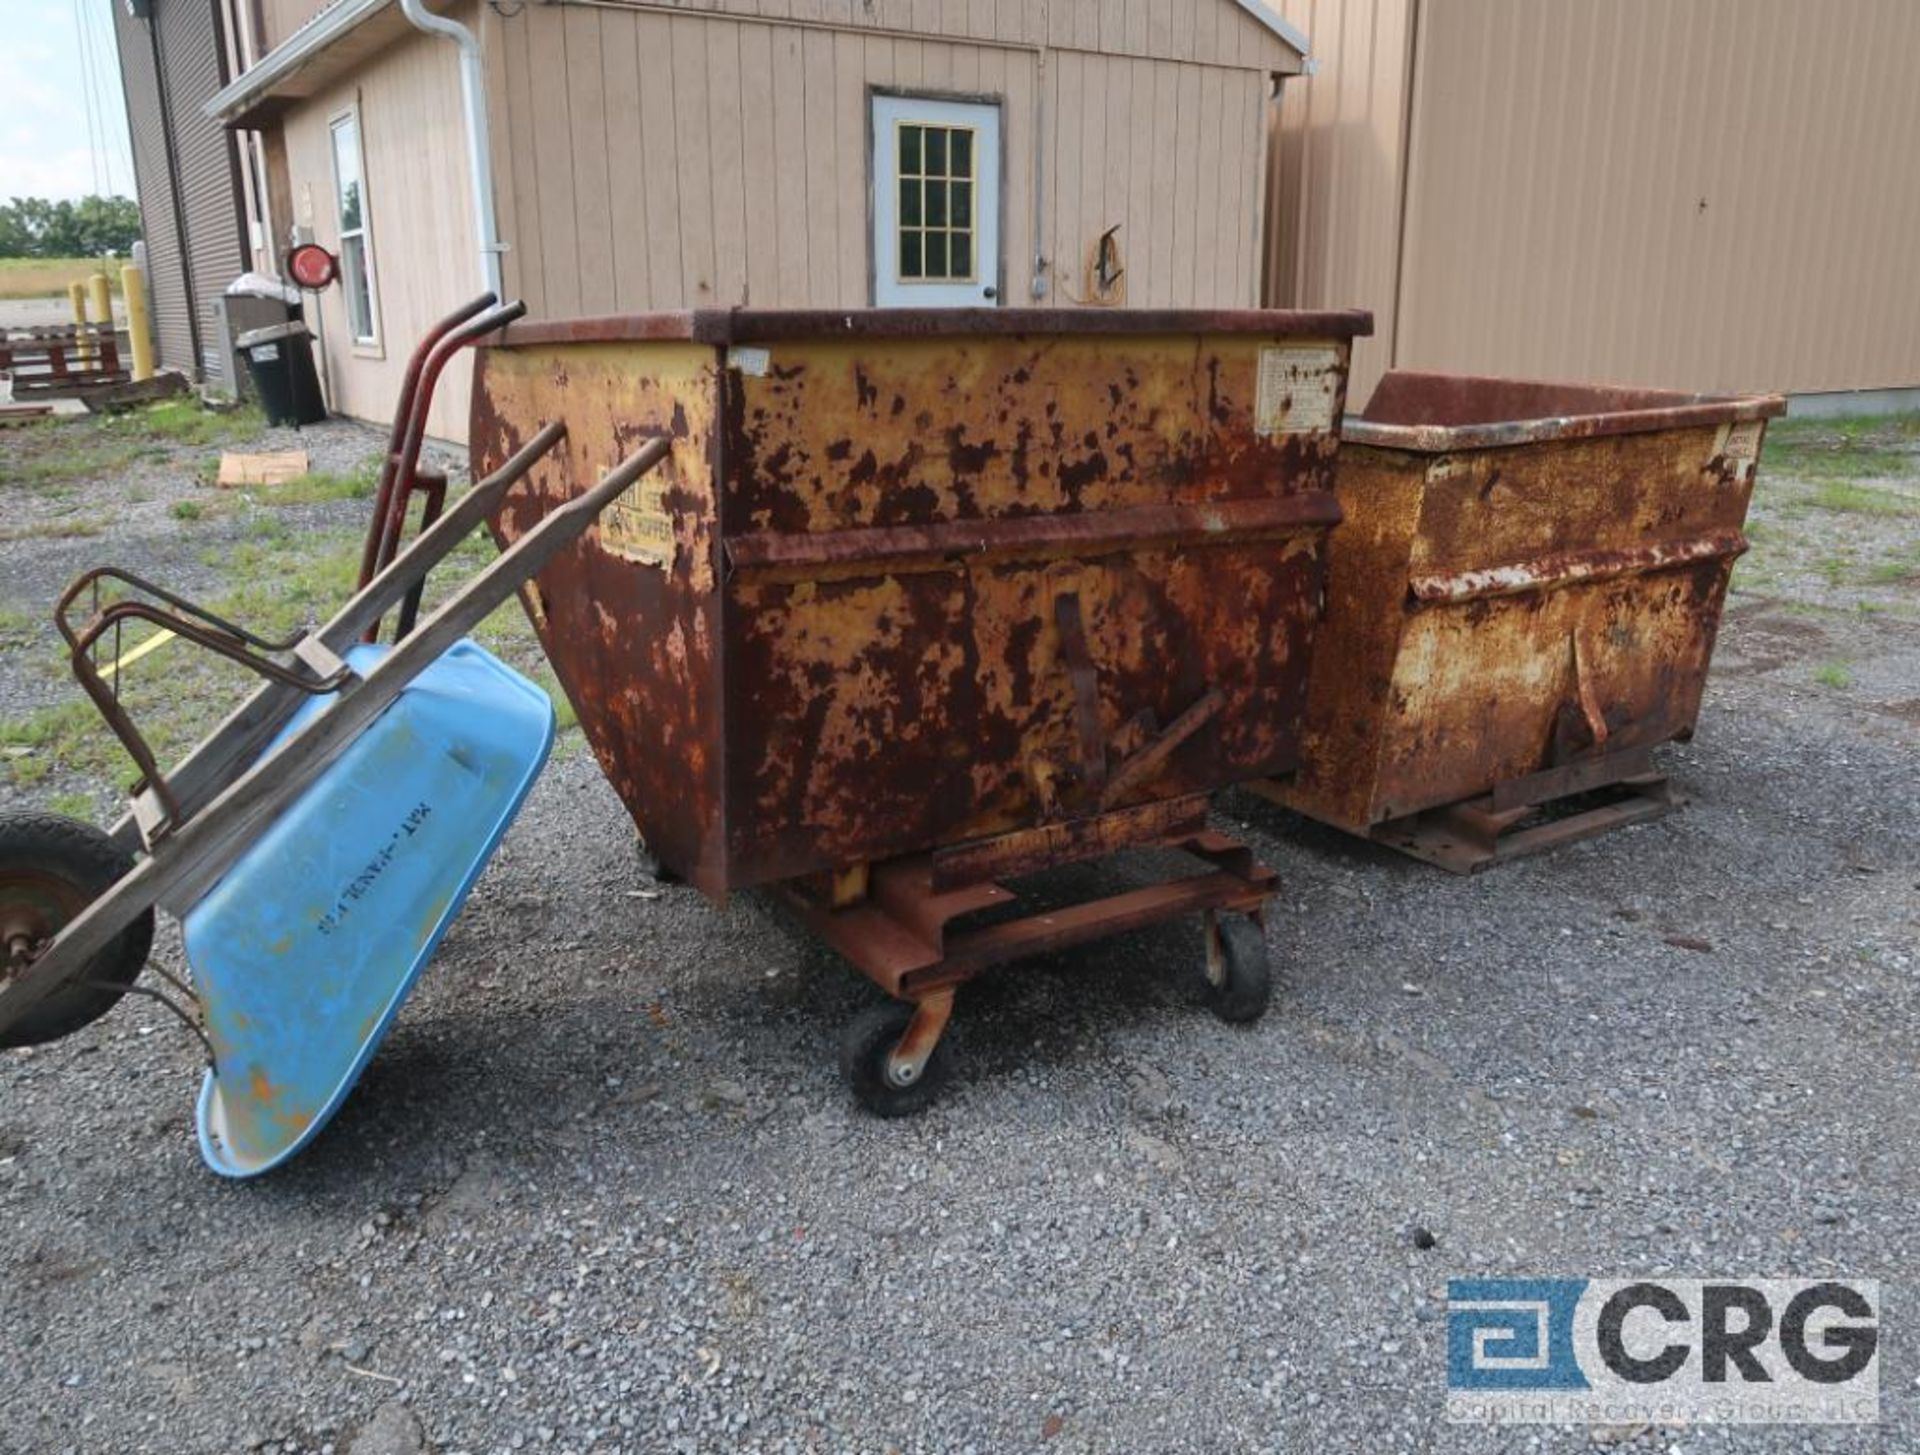 Lot of (4) miscellaneous items including (2) dumper hoppers, (1) hand truck, and (1) wheelbarrow (